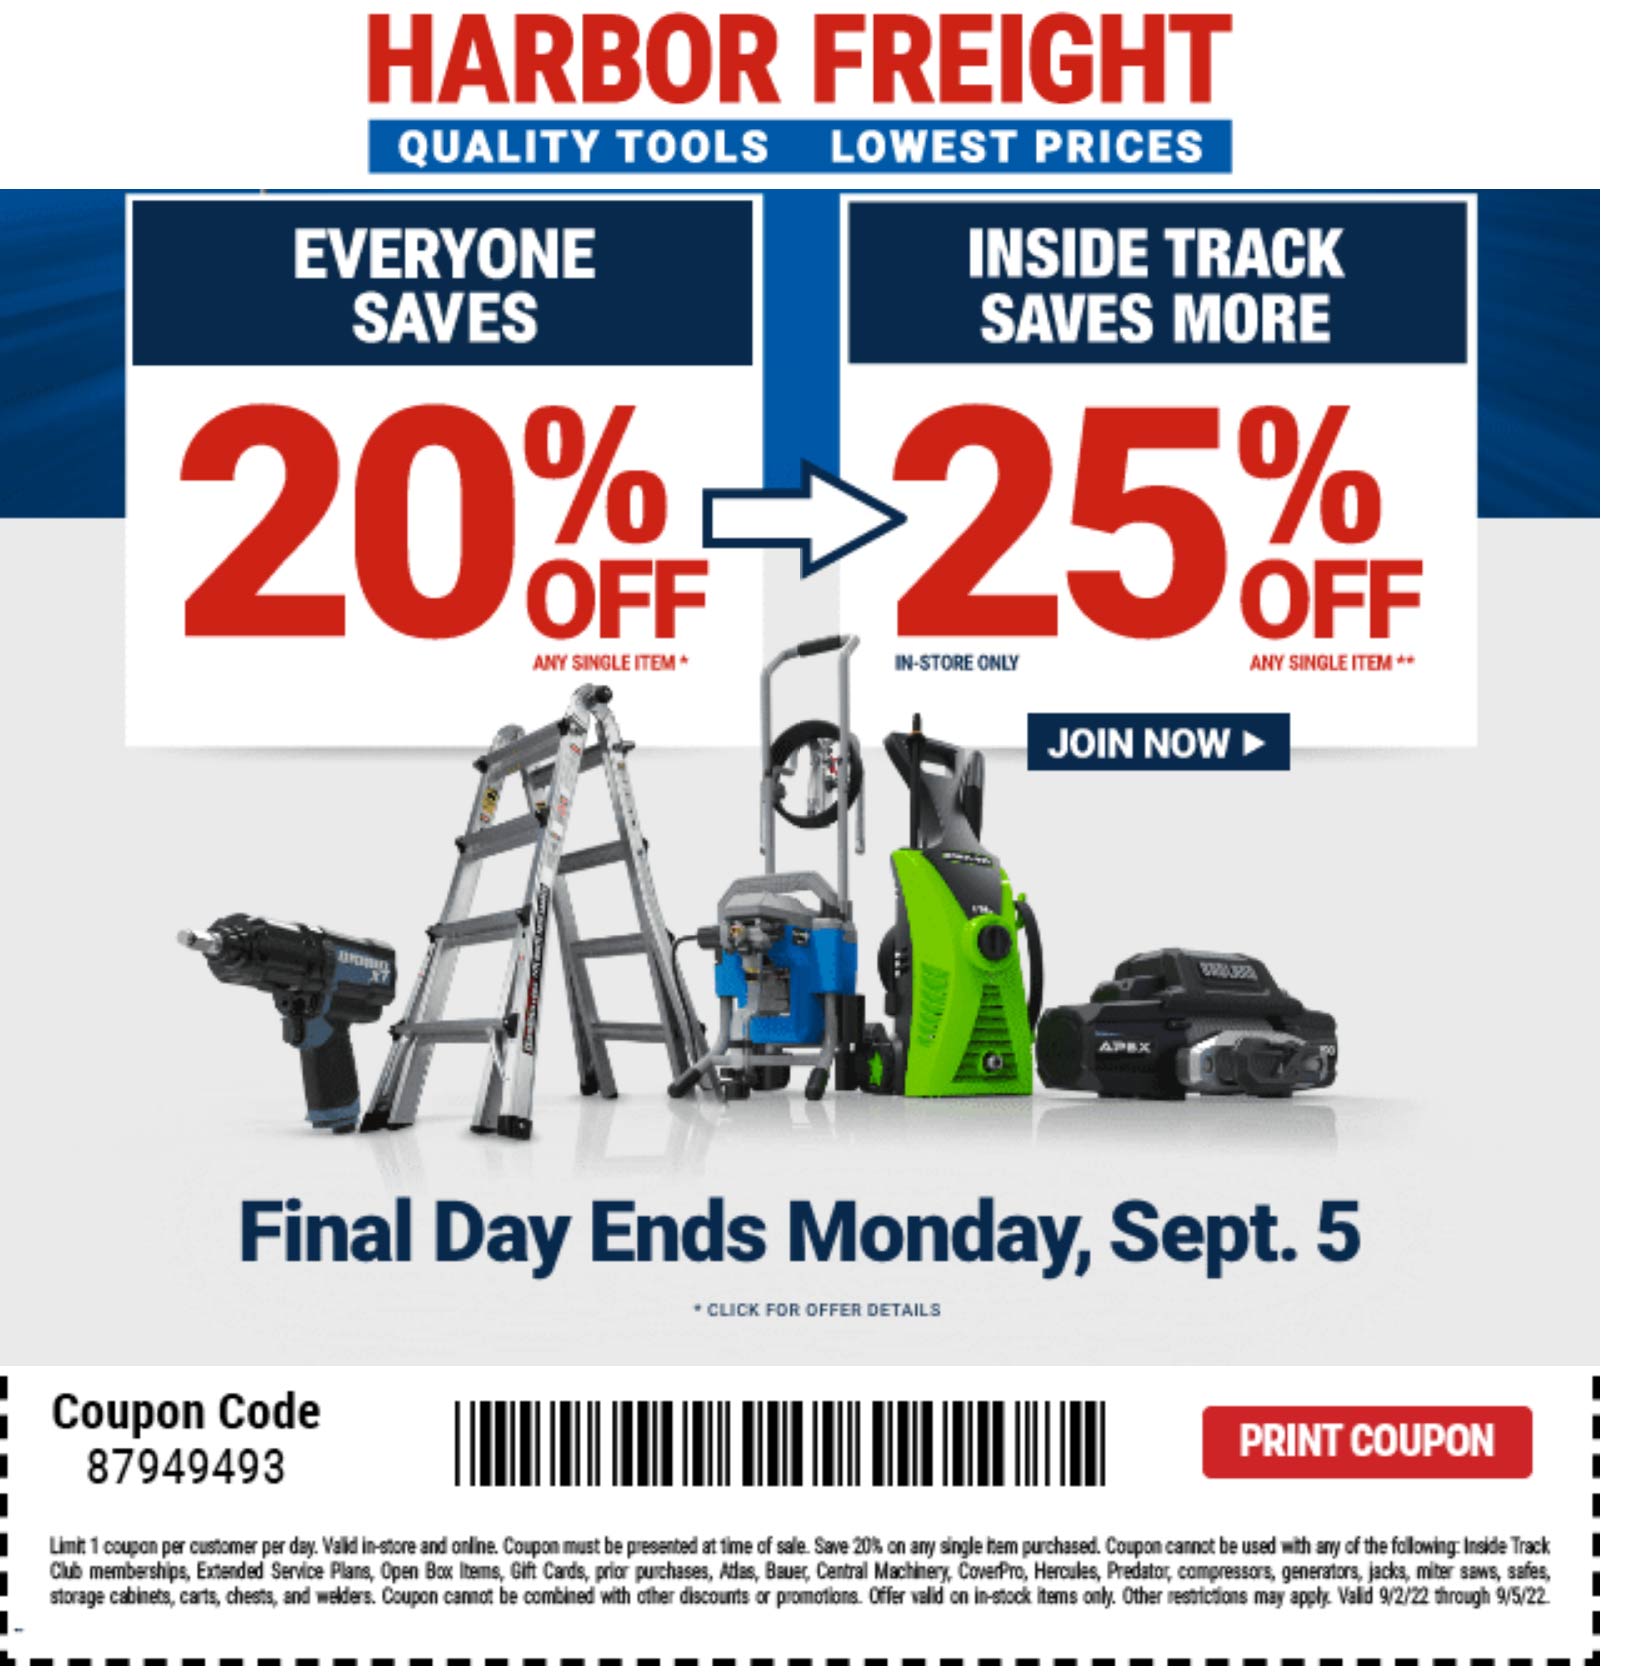 Harbor Freight stores Coupon  20% off a single item & more today at Harbor Freight Tools, or online via promo code 87949493 #harborfreight 